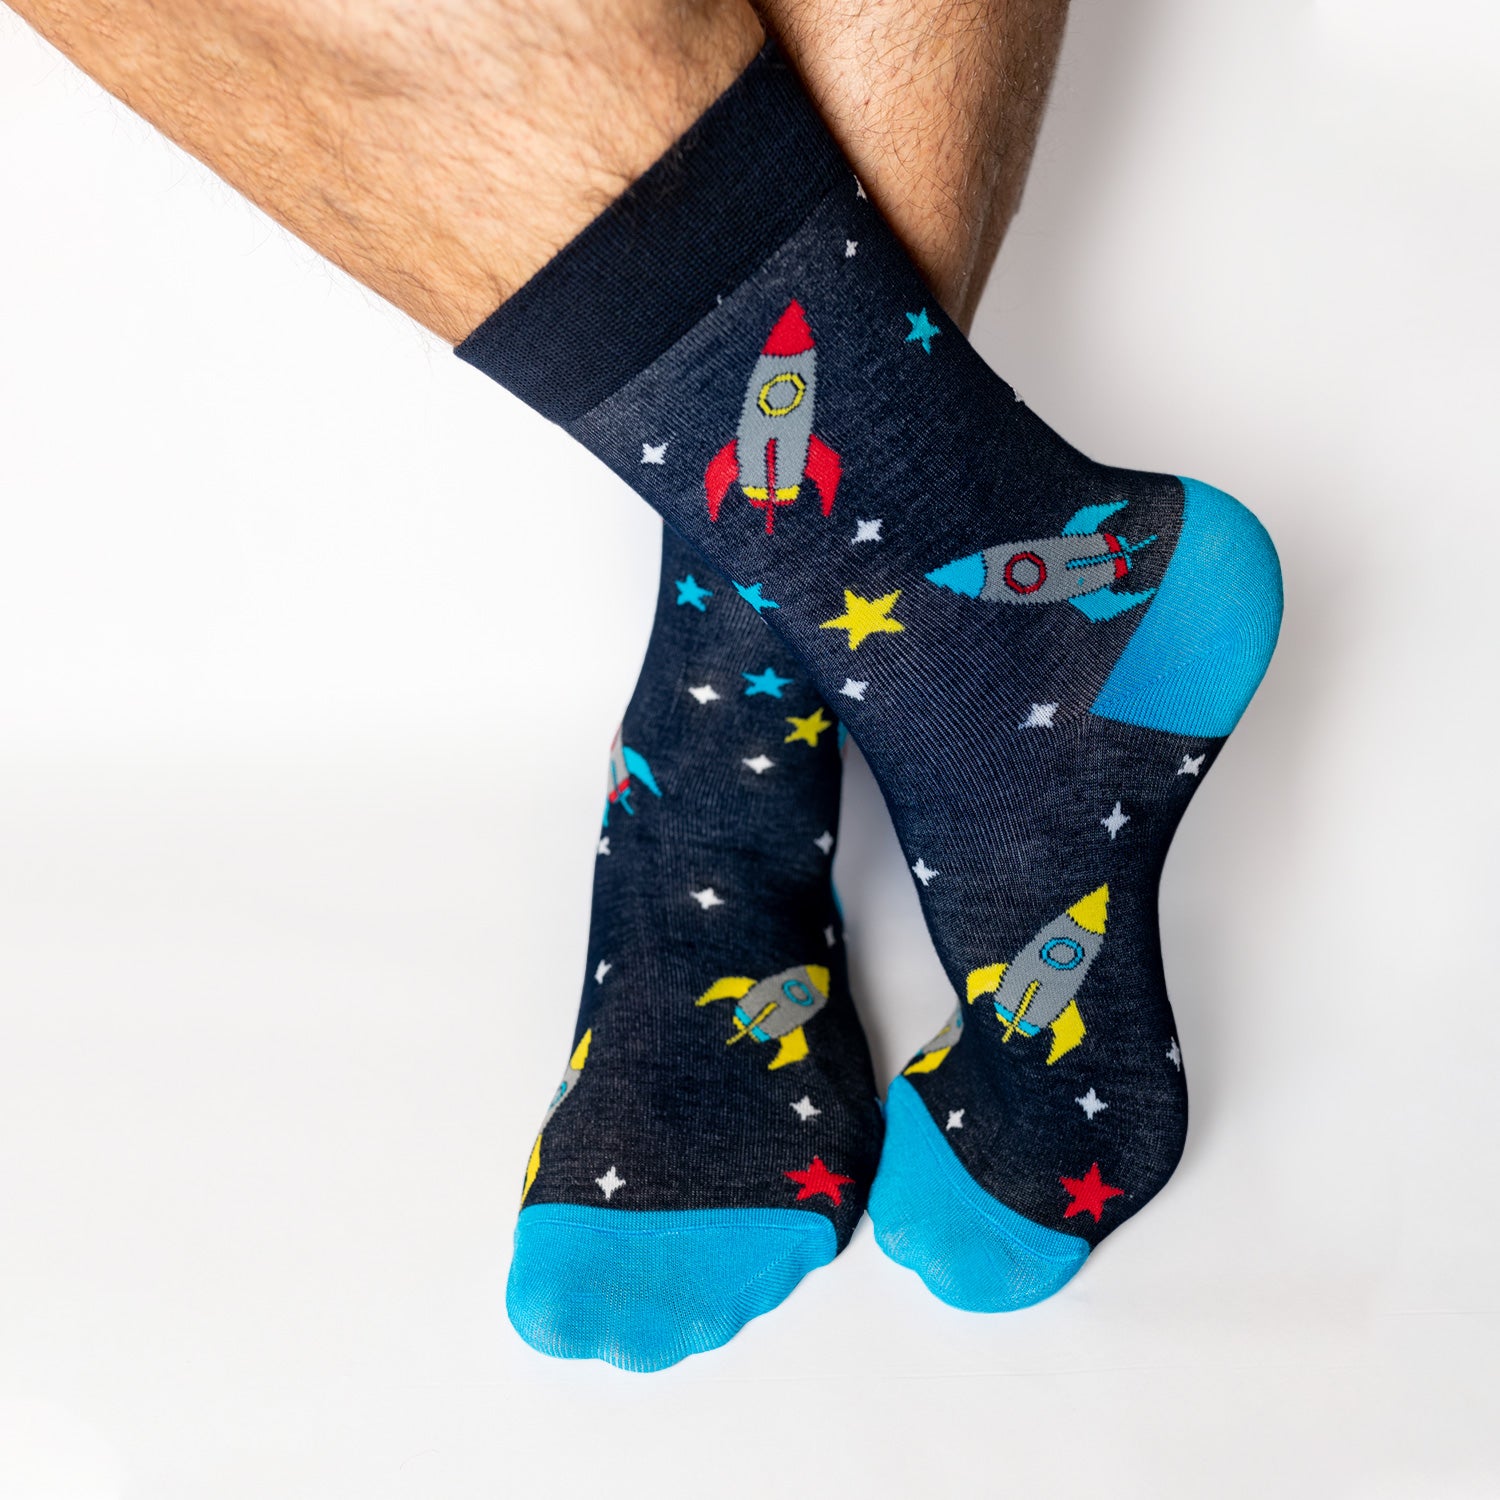 Socks that inspire us to remember those space exploration posters on our bedroom walls and and the days spent dreaming of blasting off to meet aliens from far off planets. Rocket-ships, stars, and, planets. Treat your feet to an out of this world experience.  Soft. Strong. Comfortable. Sustainable. Available in US Men’s 4-8 and 8-12